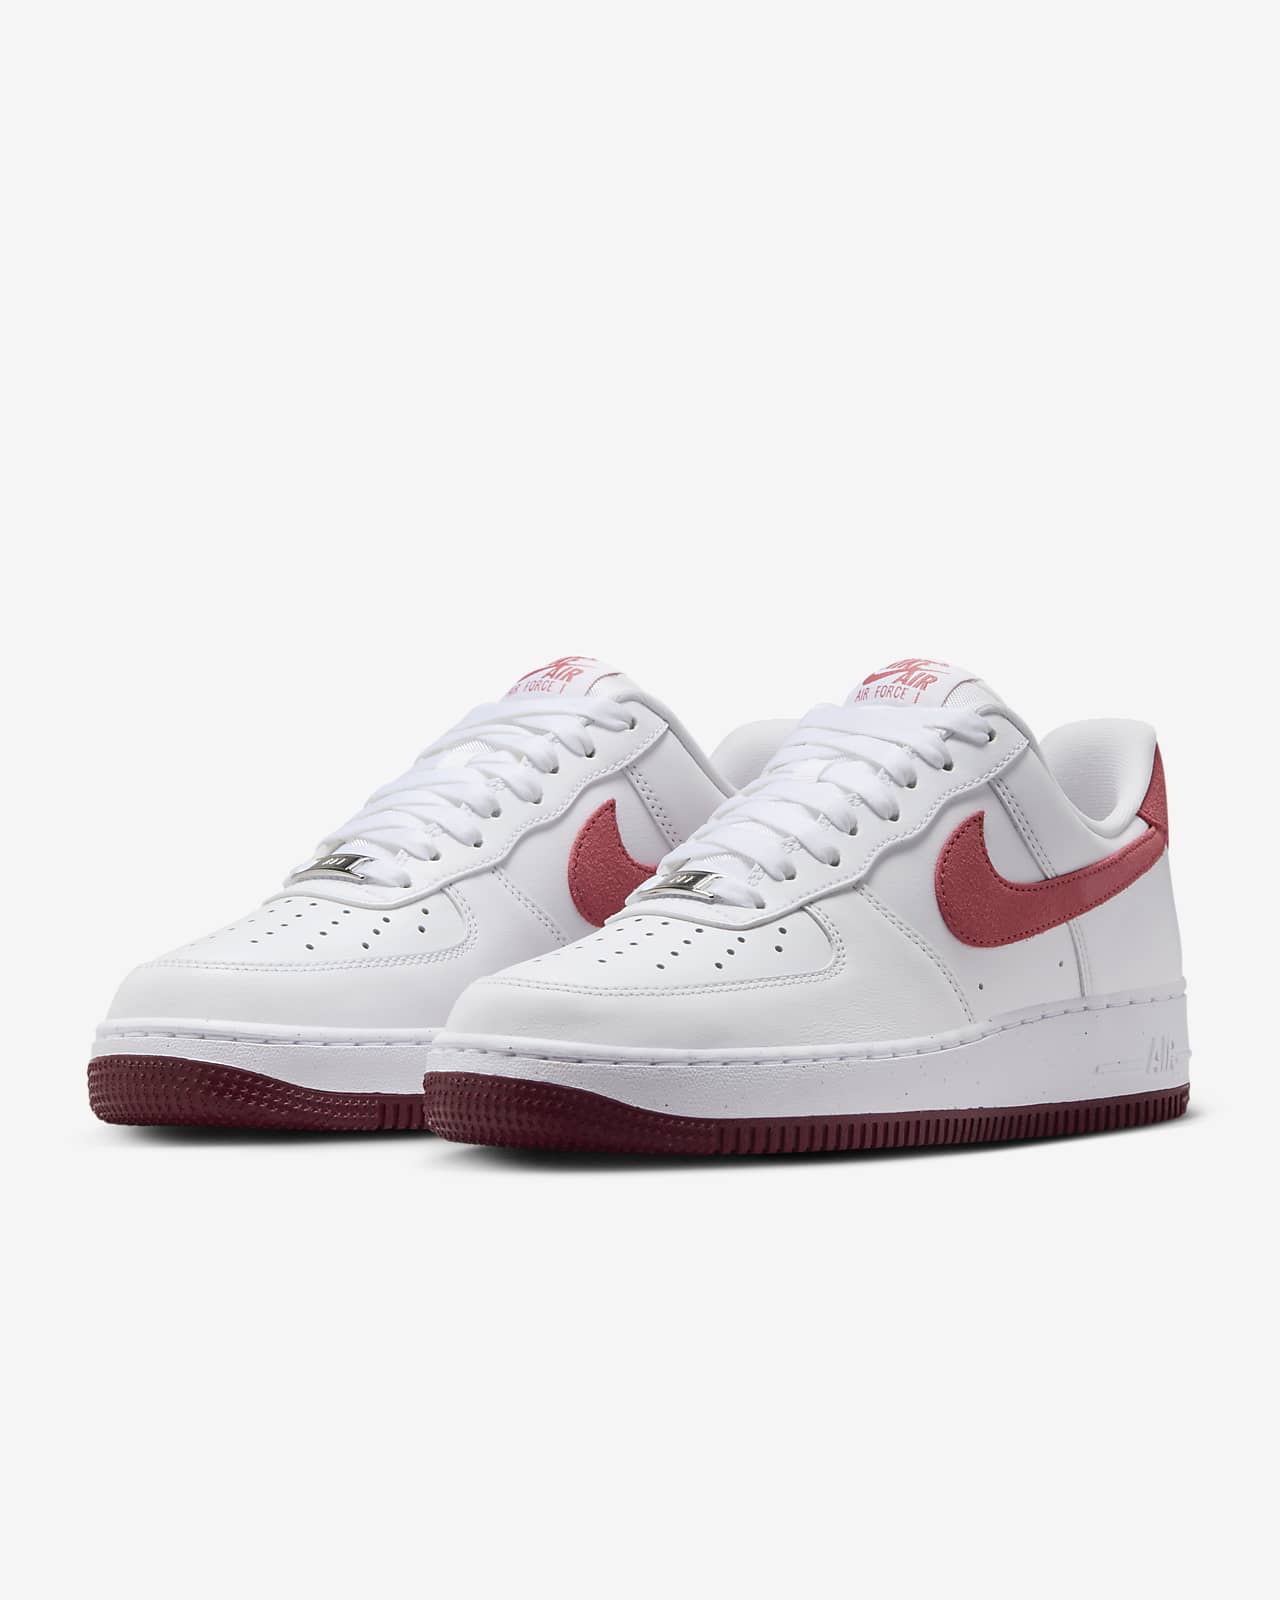 Nike Airforce 1 Low White with Rope Laces – 0000Art